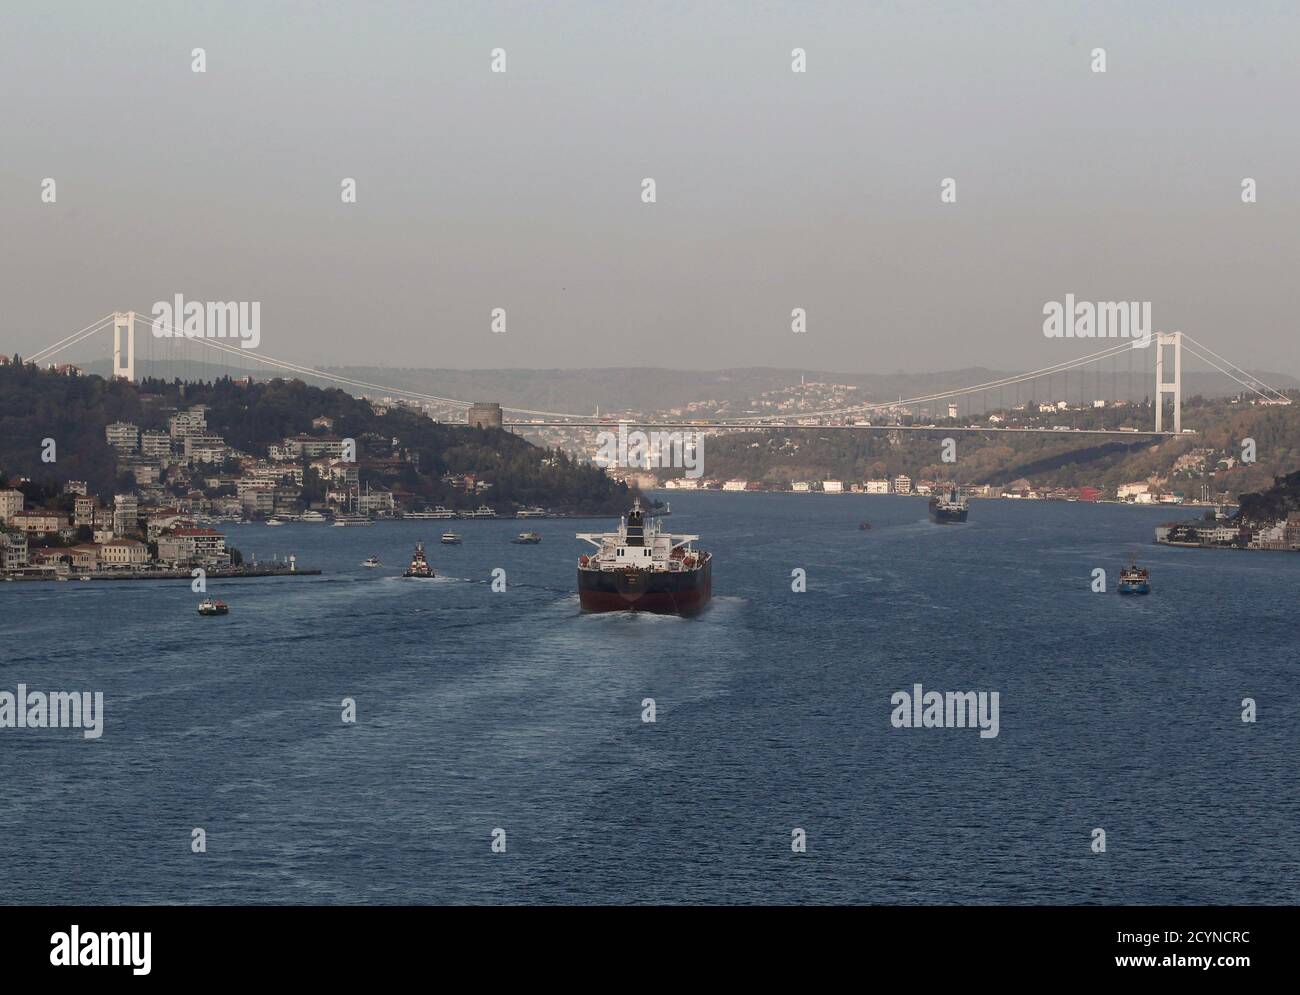 Oil tankers navigate under the Fatih Sultan Mehmet Bridge linking the city's European and Asian sides, over the Bosphorus waterway in Istanbul November 5, 2013. REUTERS/Osman Orsal (TURKEY - Tags: ENERGY MARITIME CITYSCAPE) Stock Photo